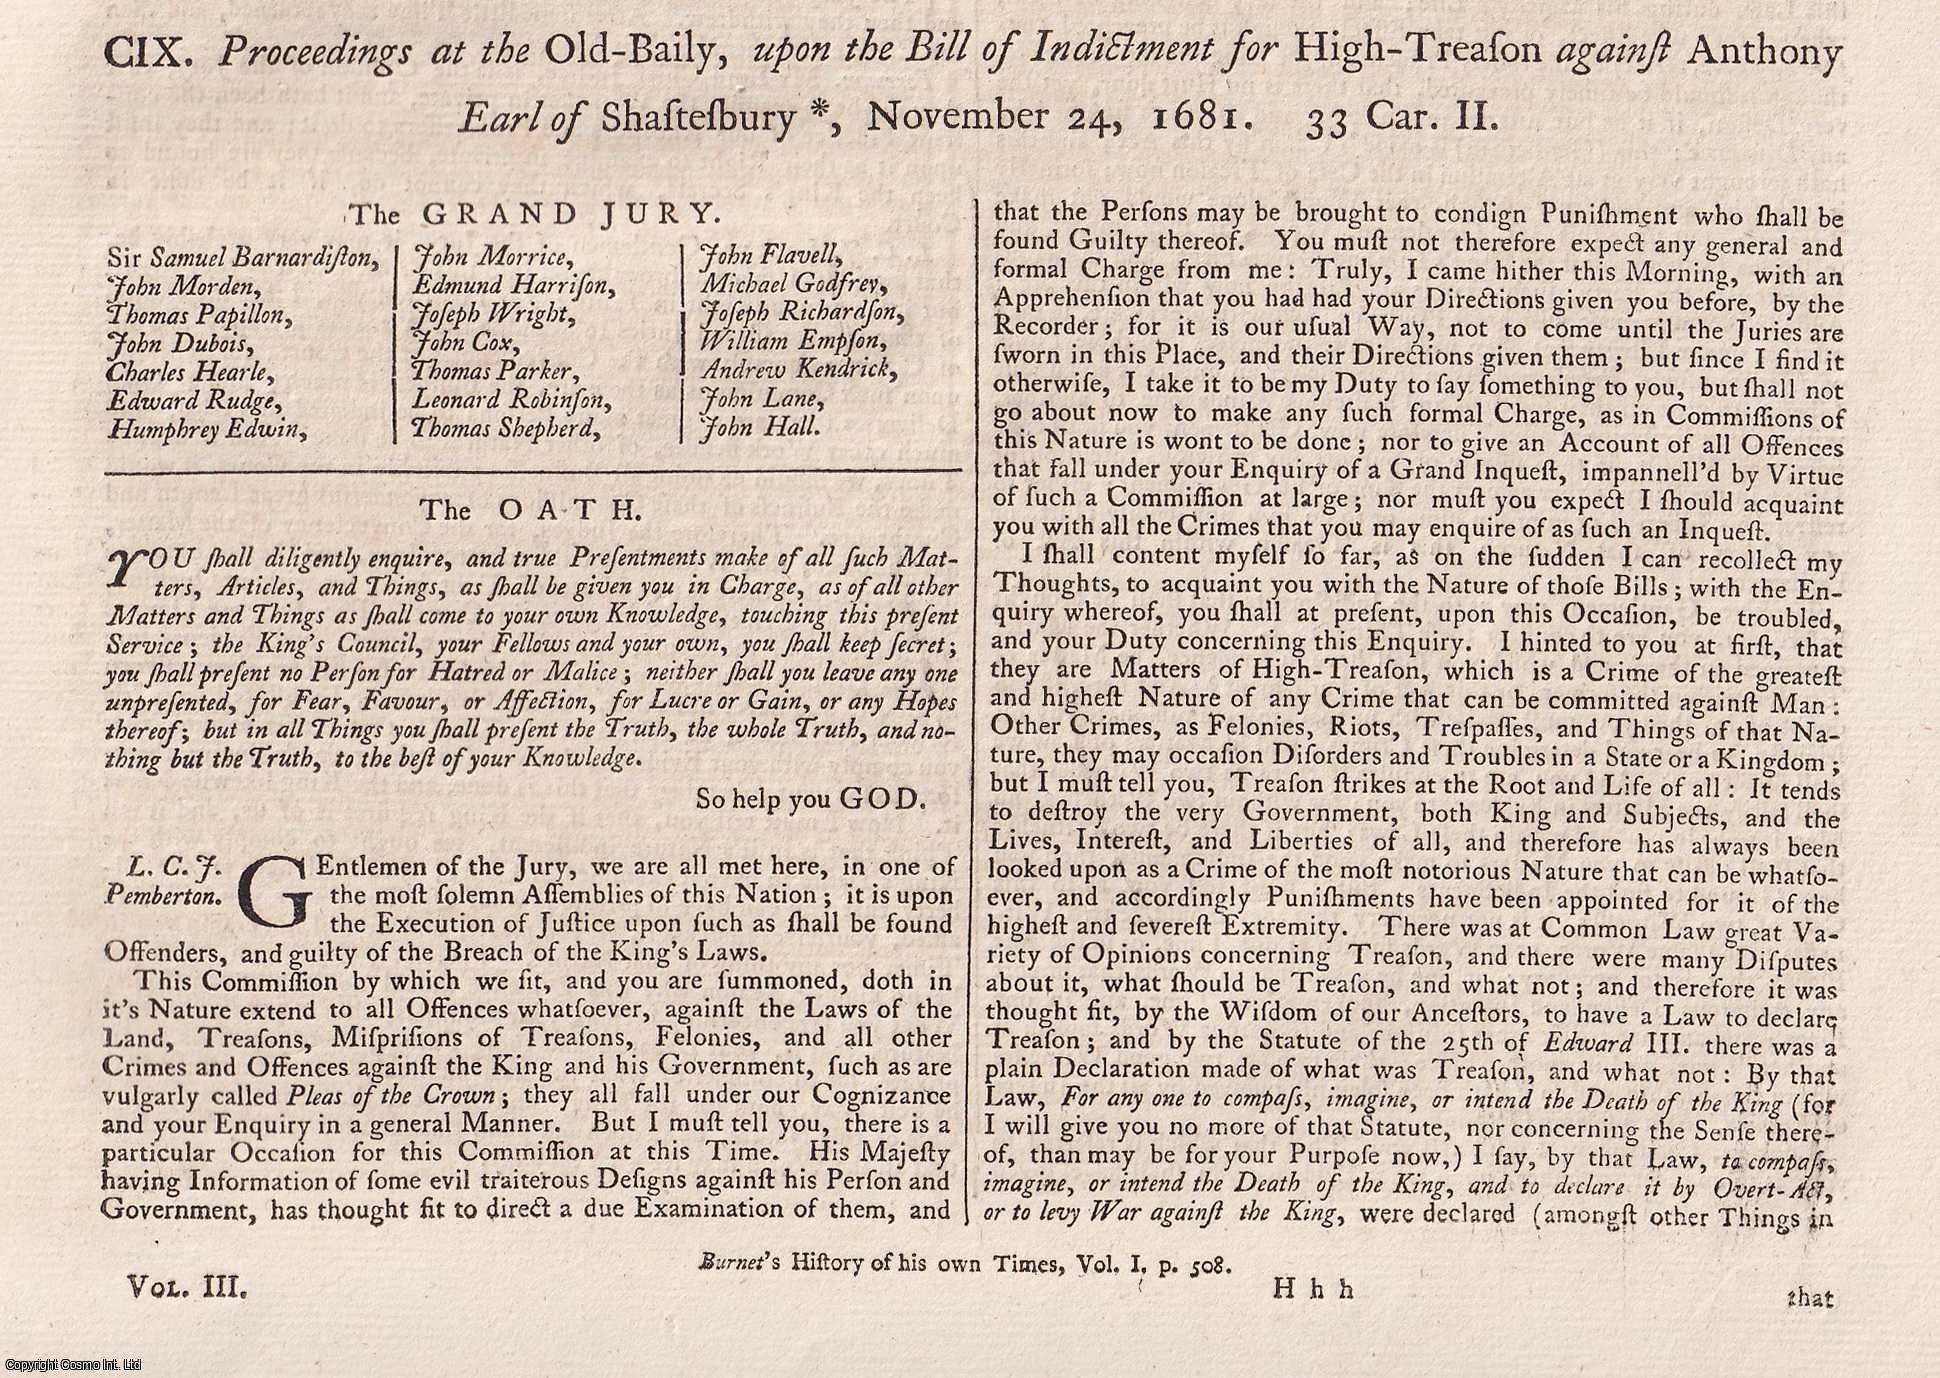 [Trial] - Proceedings at the Old Bailey, upon the Bill of Indictment for High Treason against Anthony Earl of Shaftsbury, November 24, 1681. An original article from the Collected State Trials::Folio, 1730.